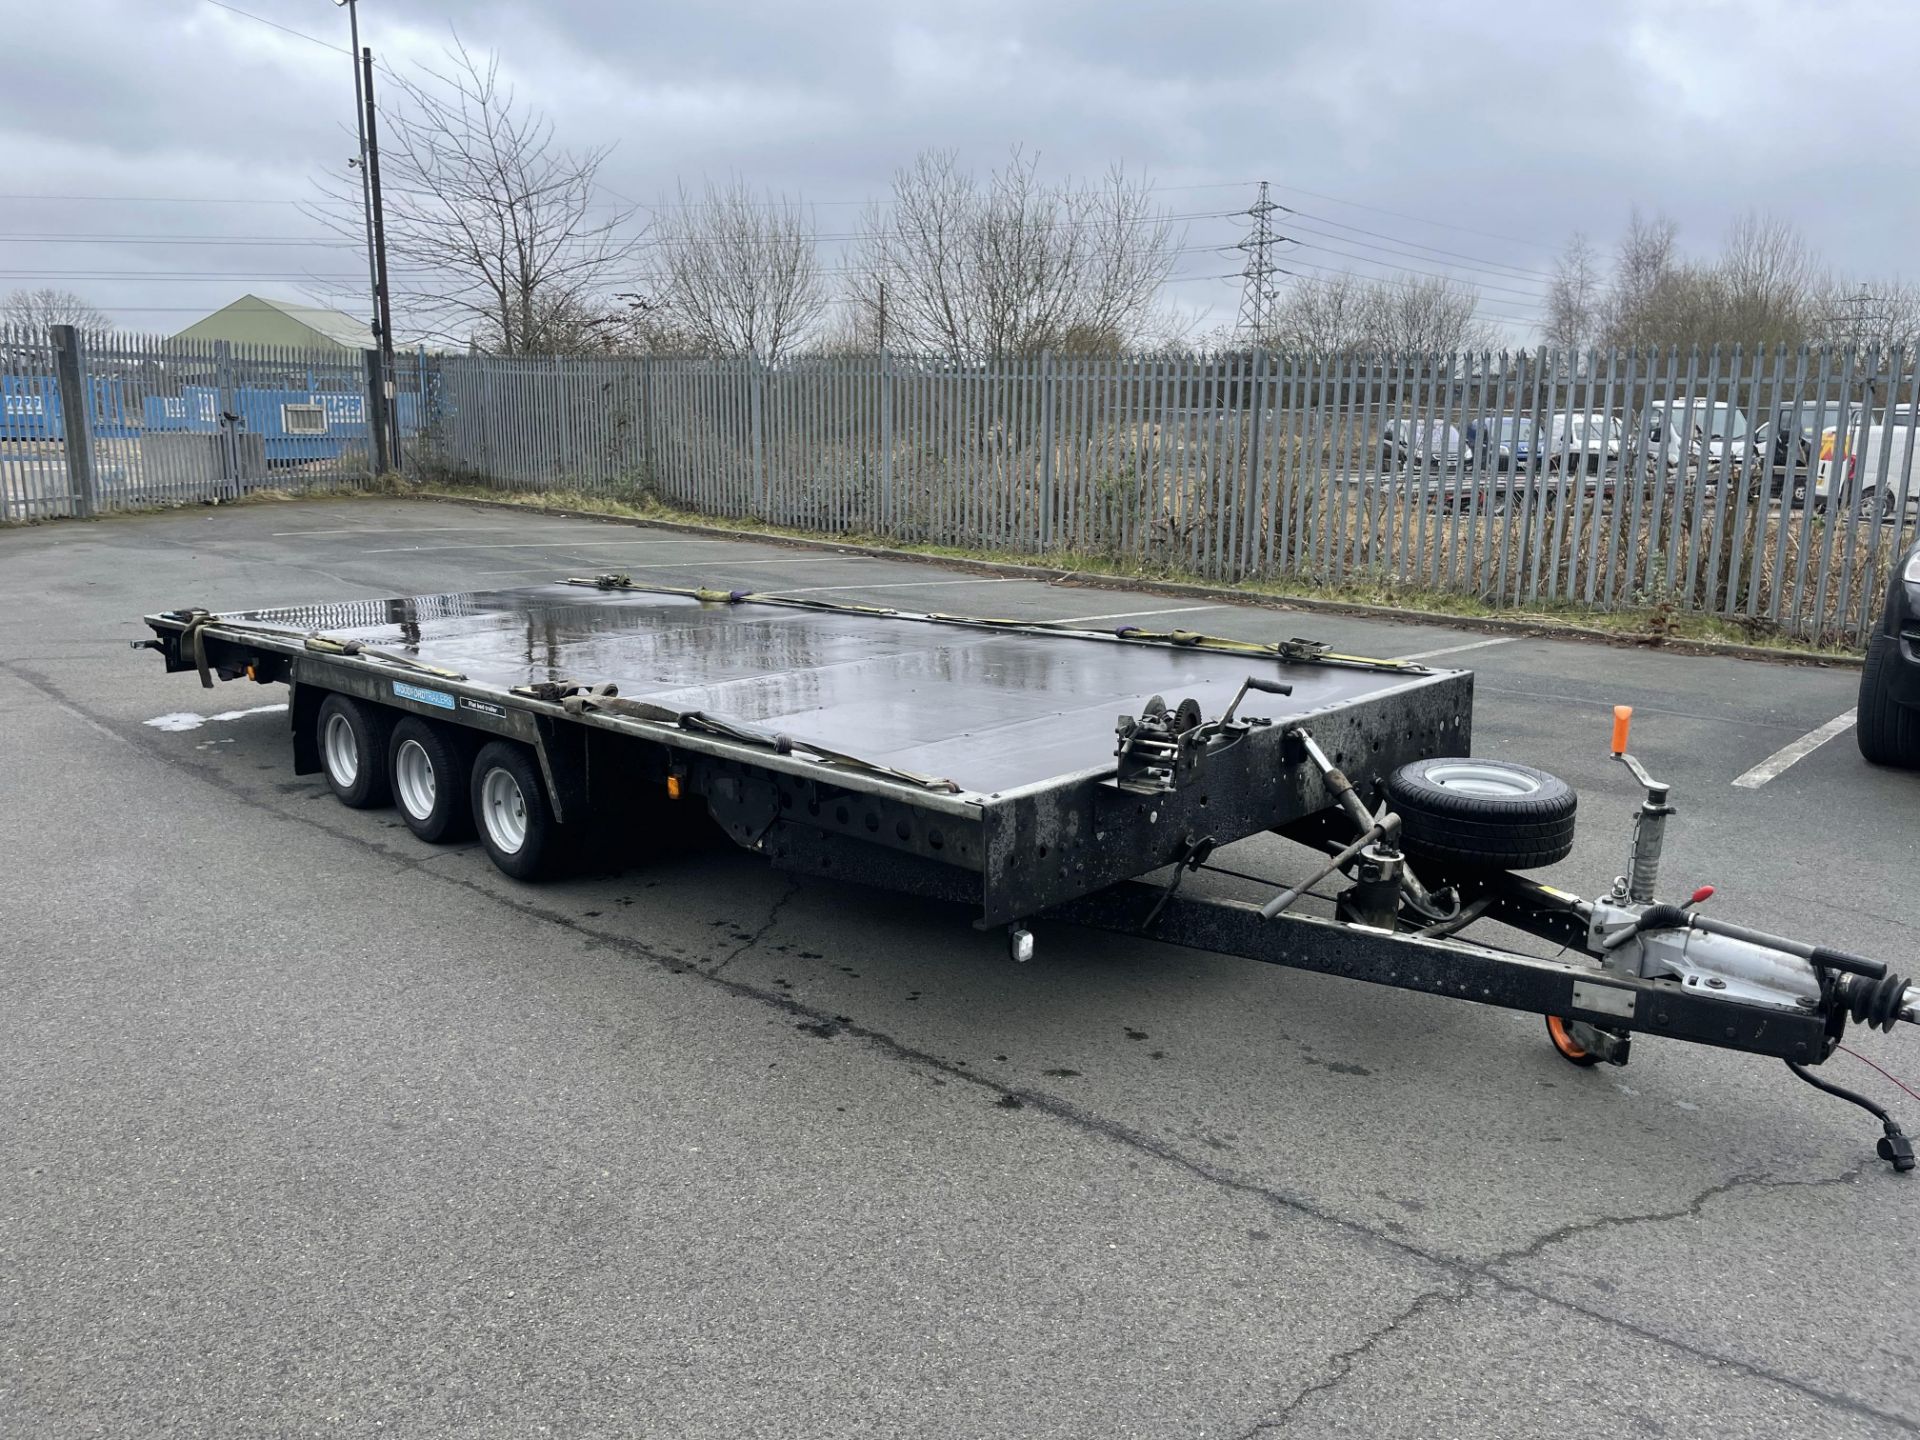 January 2021 Woodford 18 Ft Tri-Axle Hydraulic Tilt Flatbed Trailer c/w Ramps and Manual winch - Image 7 of 10